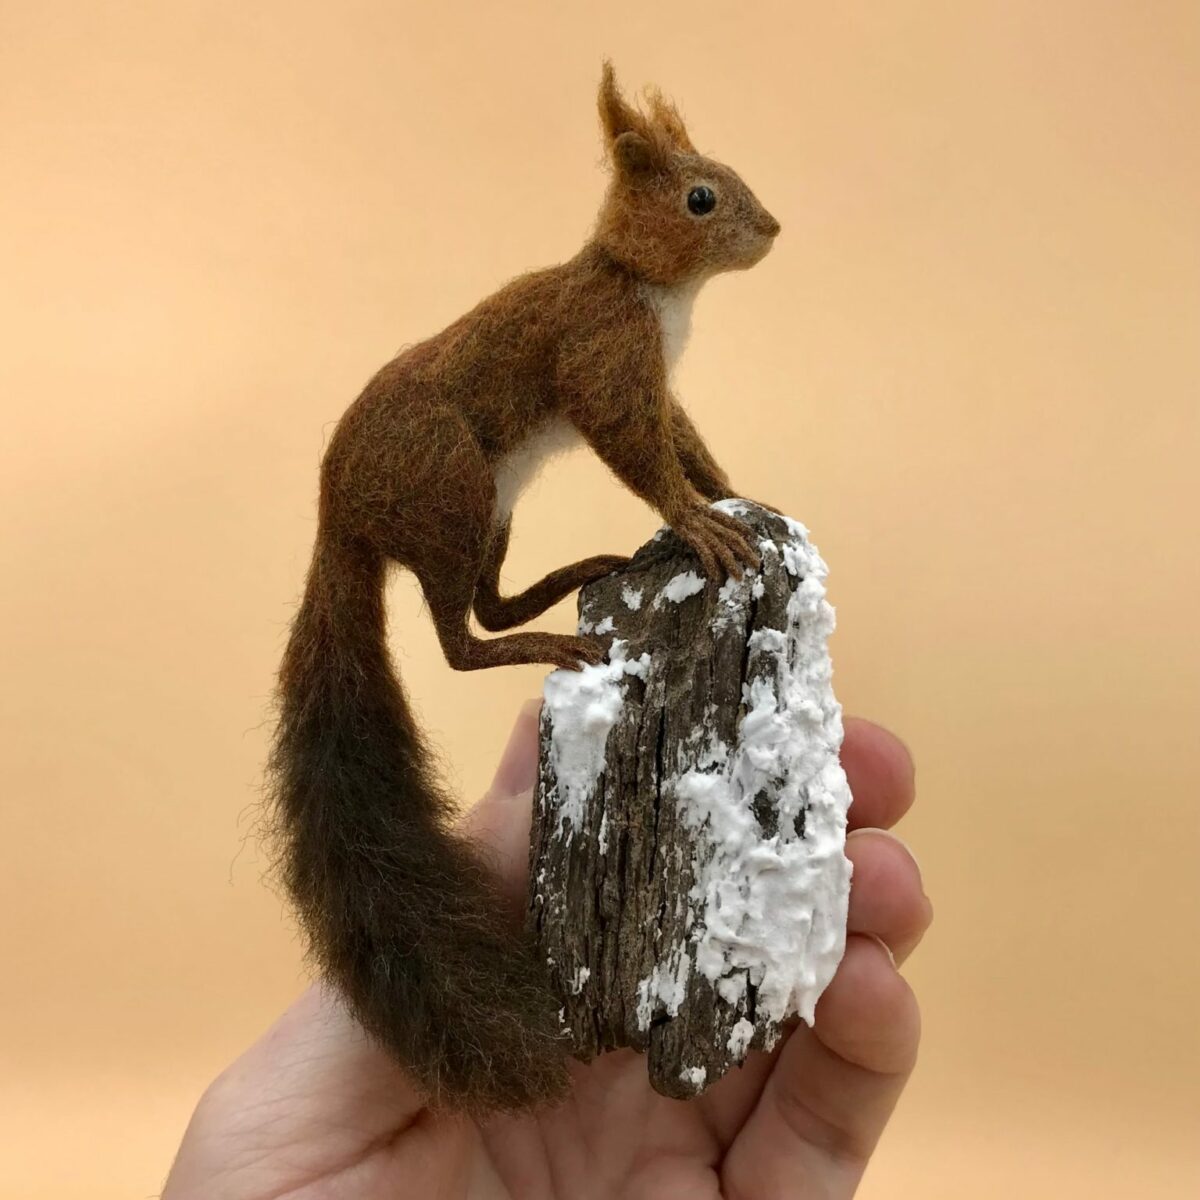 Felted Wildlife Gorgeous Miniature Animal Sculptures By Simon Brown And Katie Corrigan 2